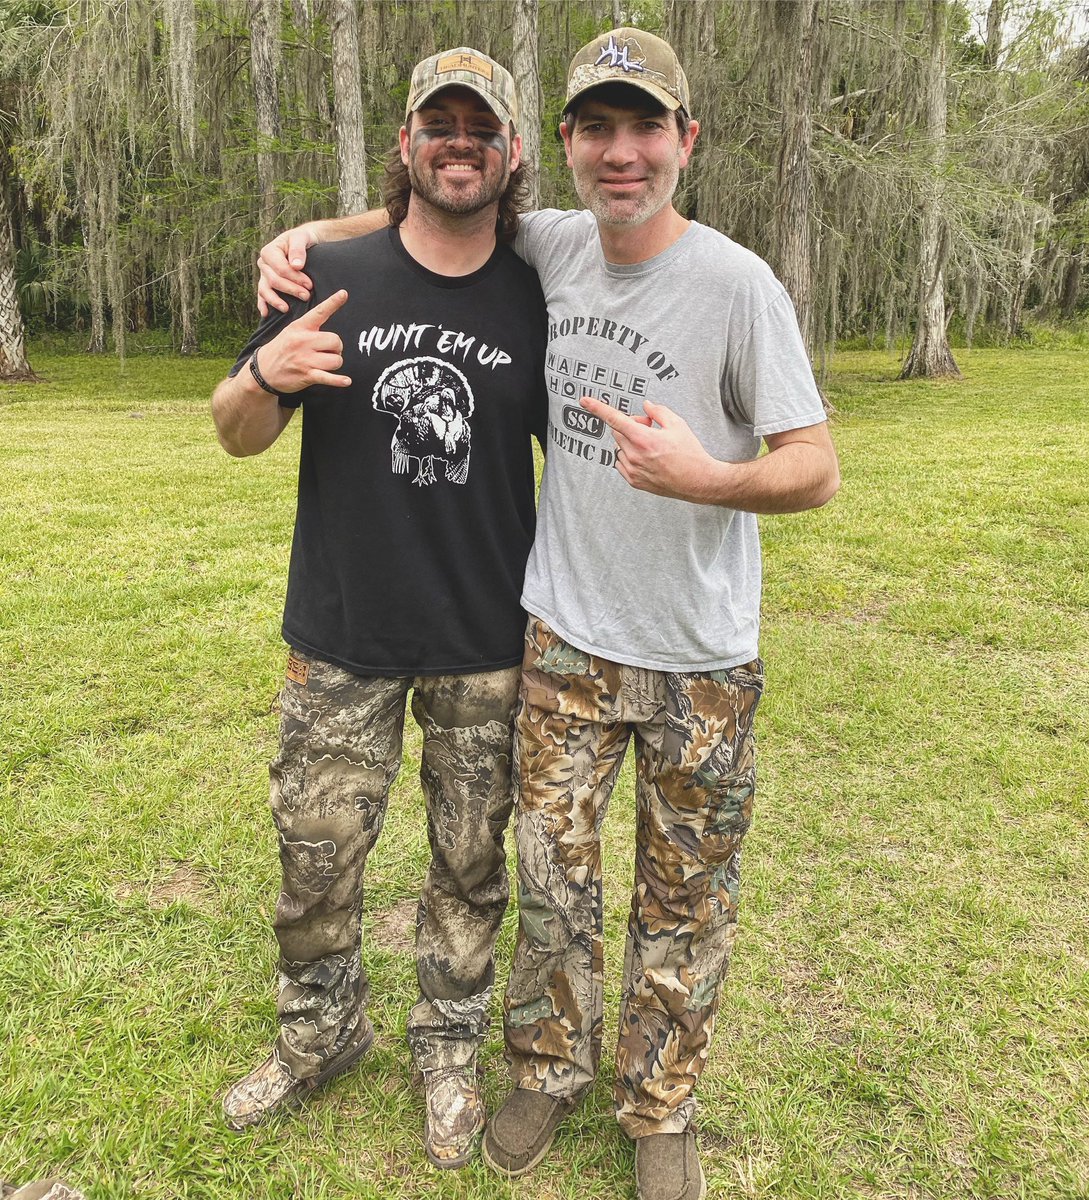 Kicked off the season in the FL swamps with one of my best friends and no doubt one of the best turkey hunters the world has ever seen! Just imagine his success if he painted up! @CulpepperJr #PhillipsPaintlessPlatoon #tbt #paintup #huntemup